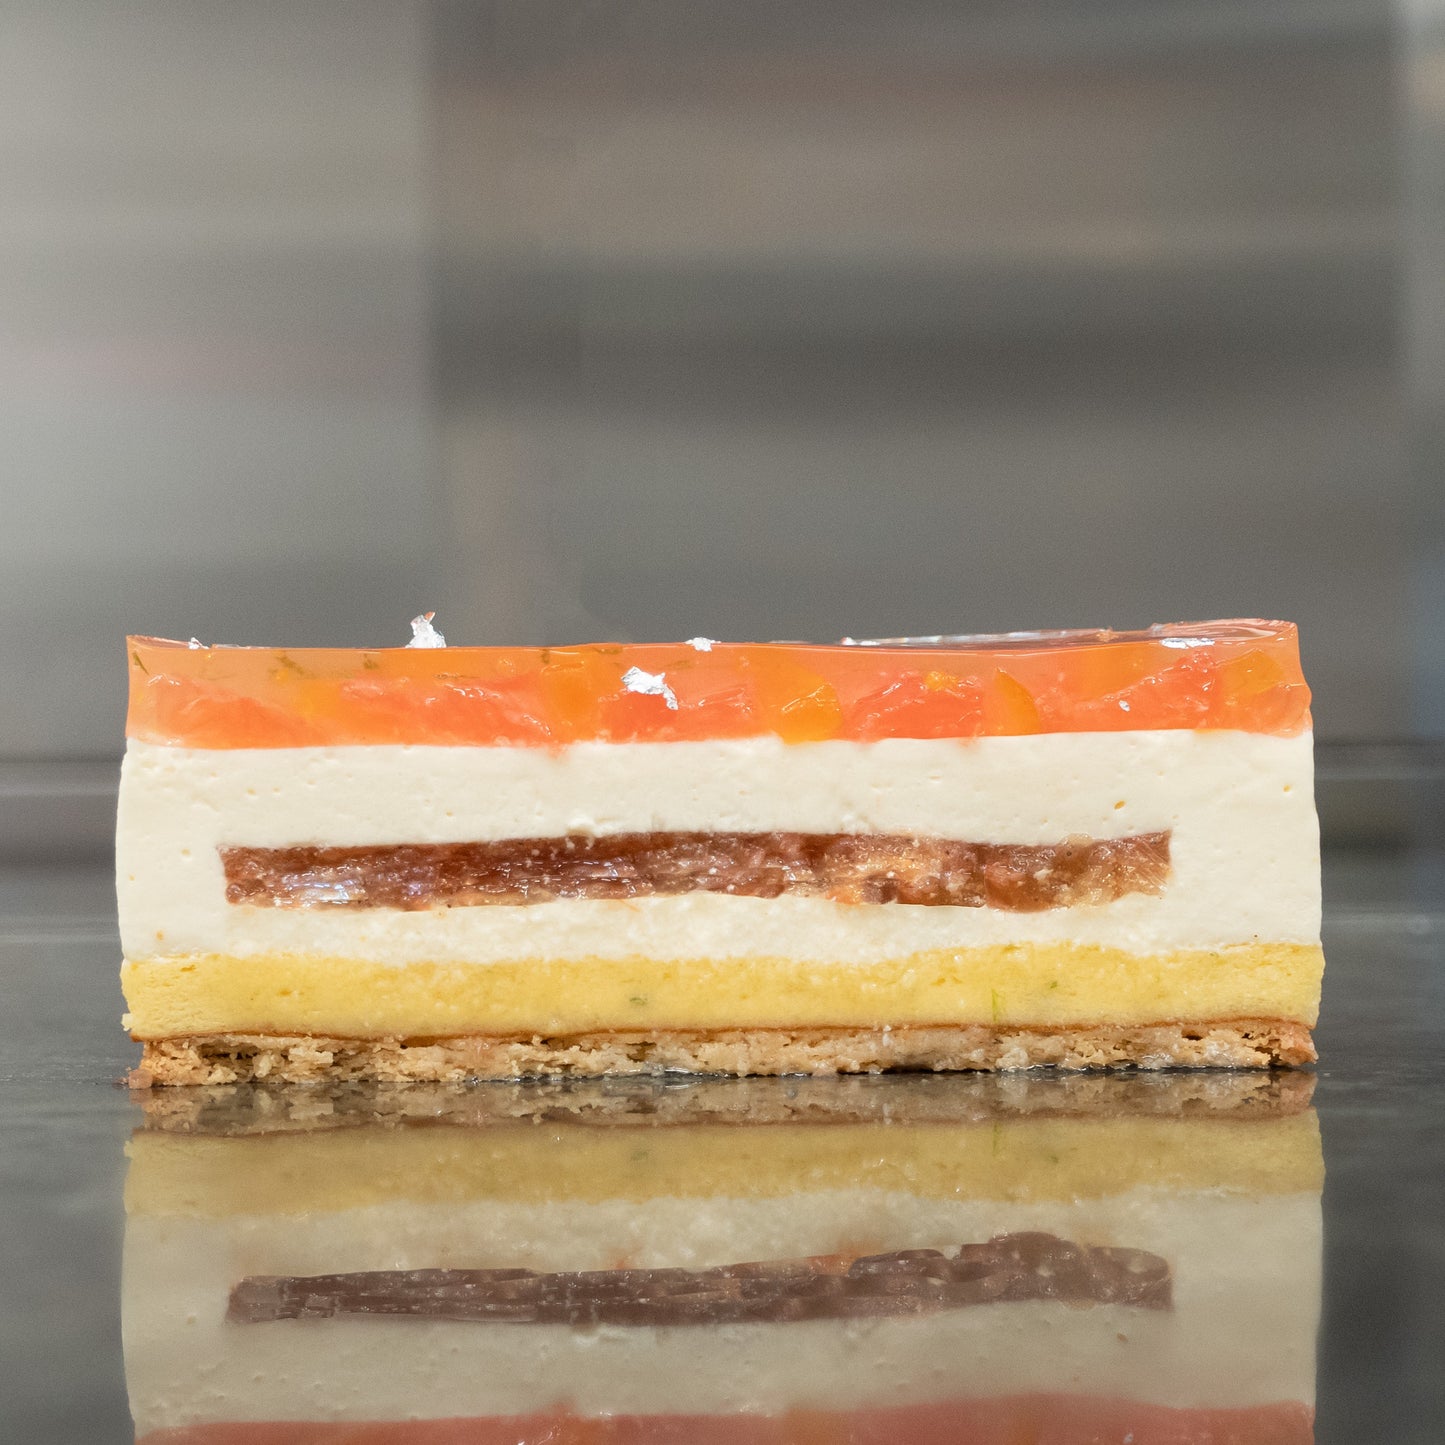 Layered cake with sablé Breton and lime sponge on the bottom, fromage blanc mousse in the middle, and grapefruit Timur pepper confit on top Topped with a jelly layer of grapefruit and confit kumquat A delicious treat for any occasion or special indulgence Cross-section view showcasing the different layers and textures of the cake